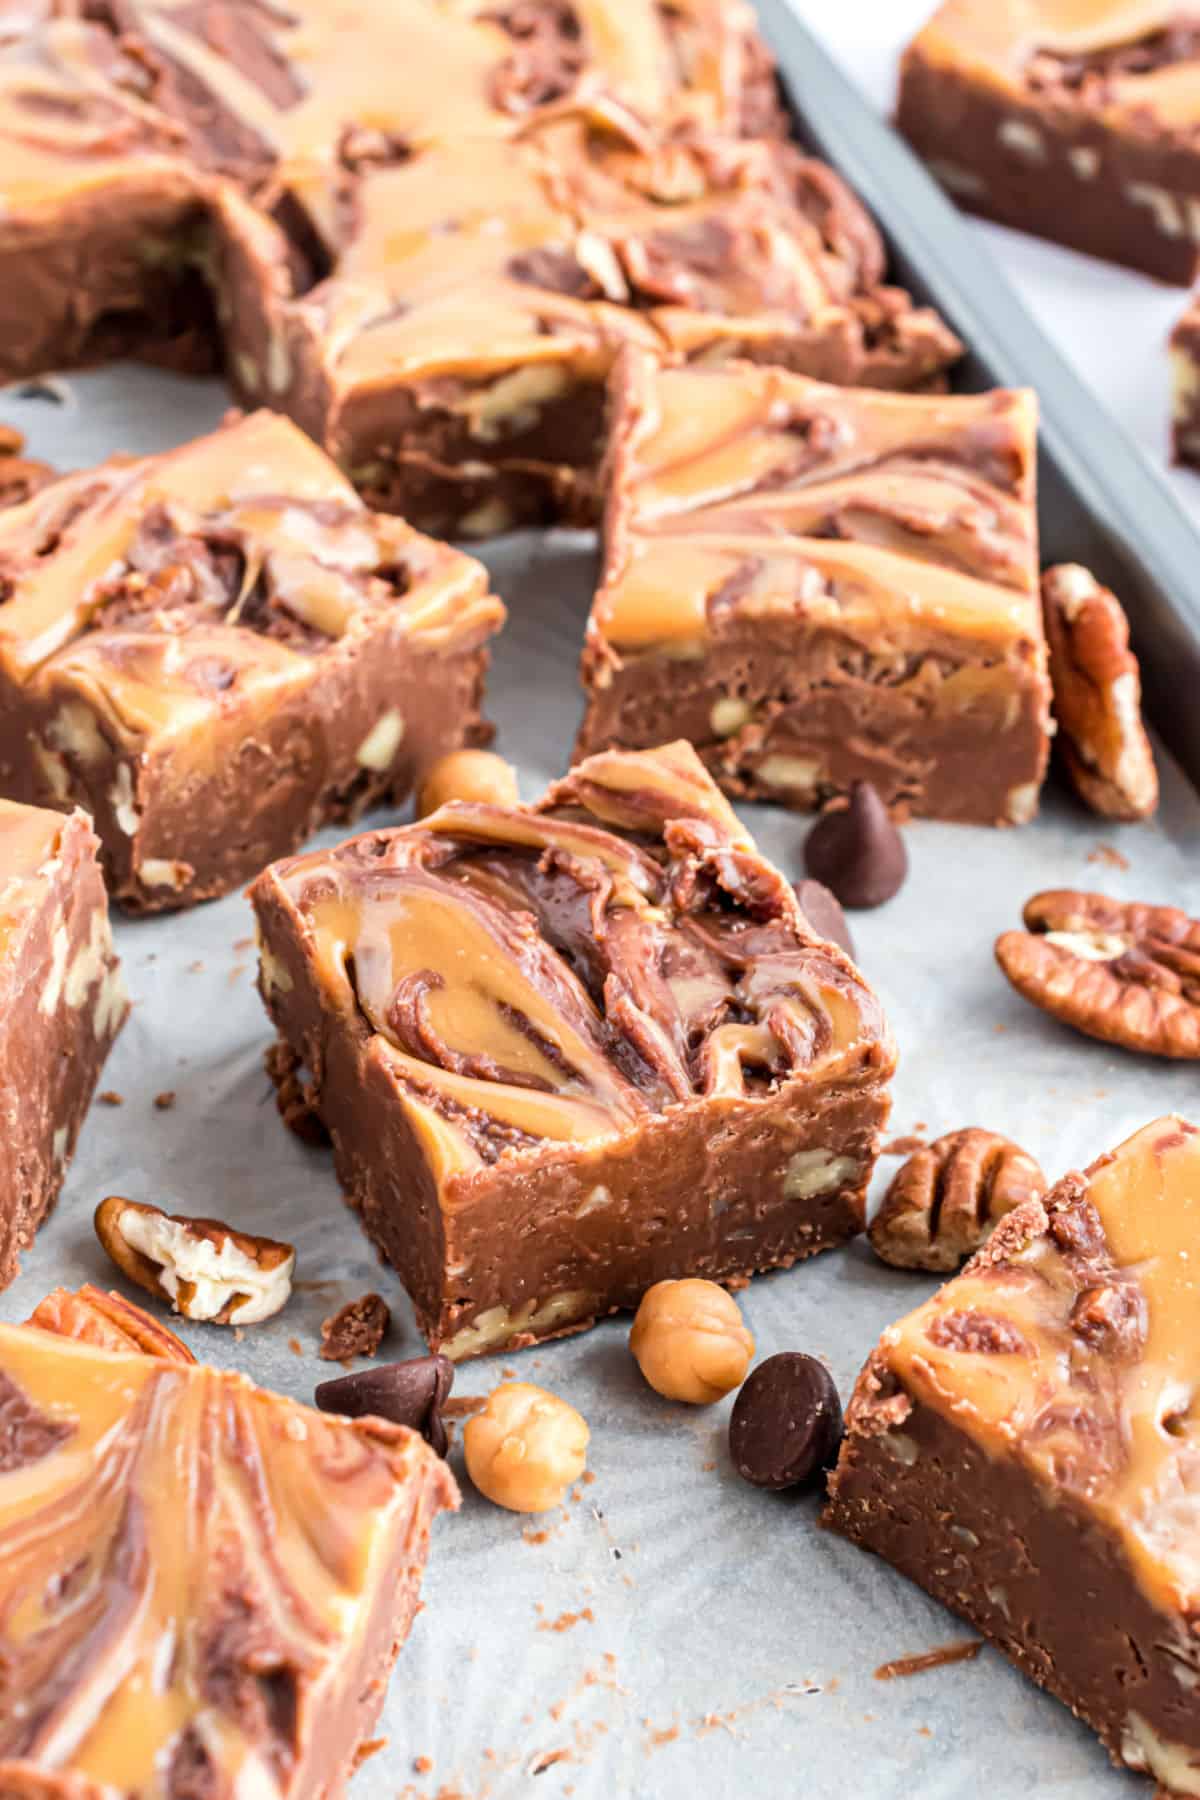 Chocolate fudge with nuts and caramel cut on parchment paper.